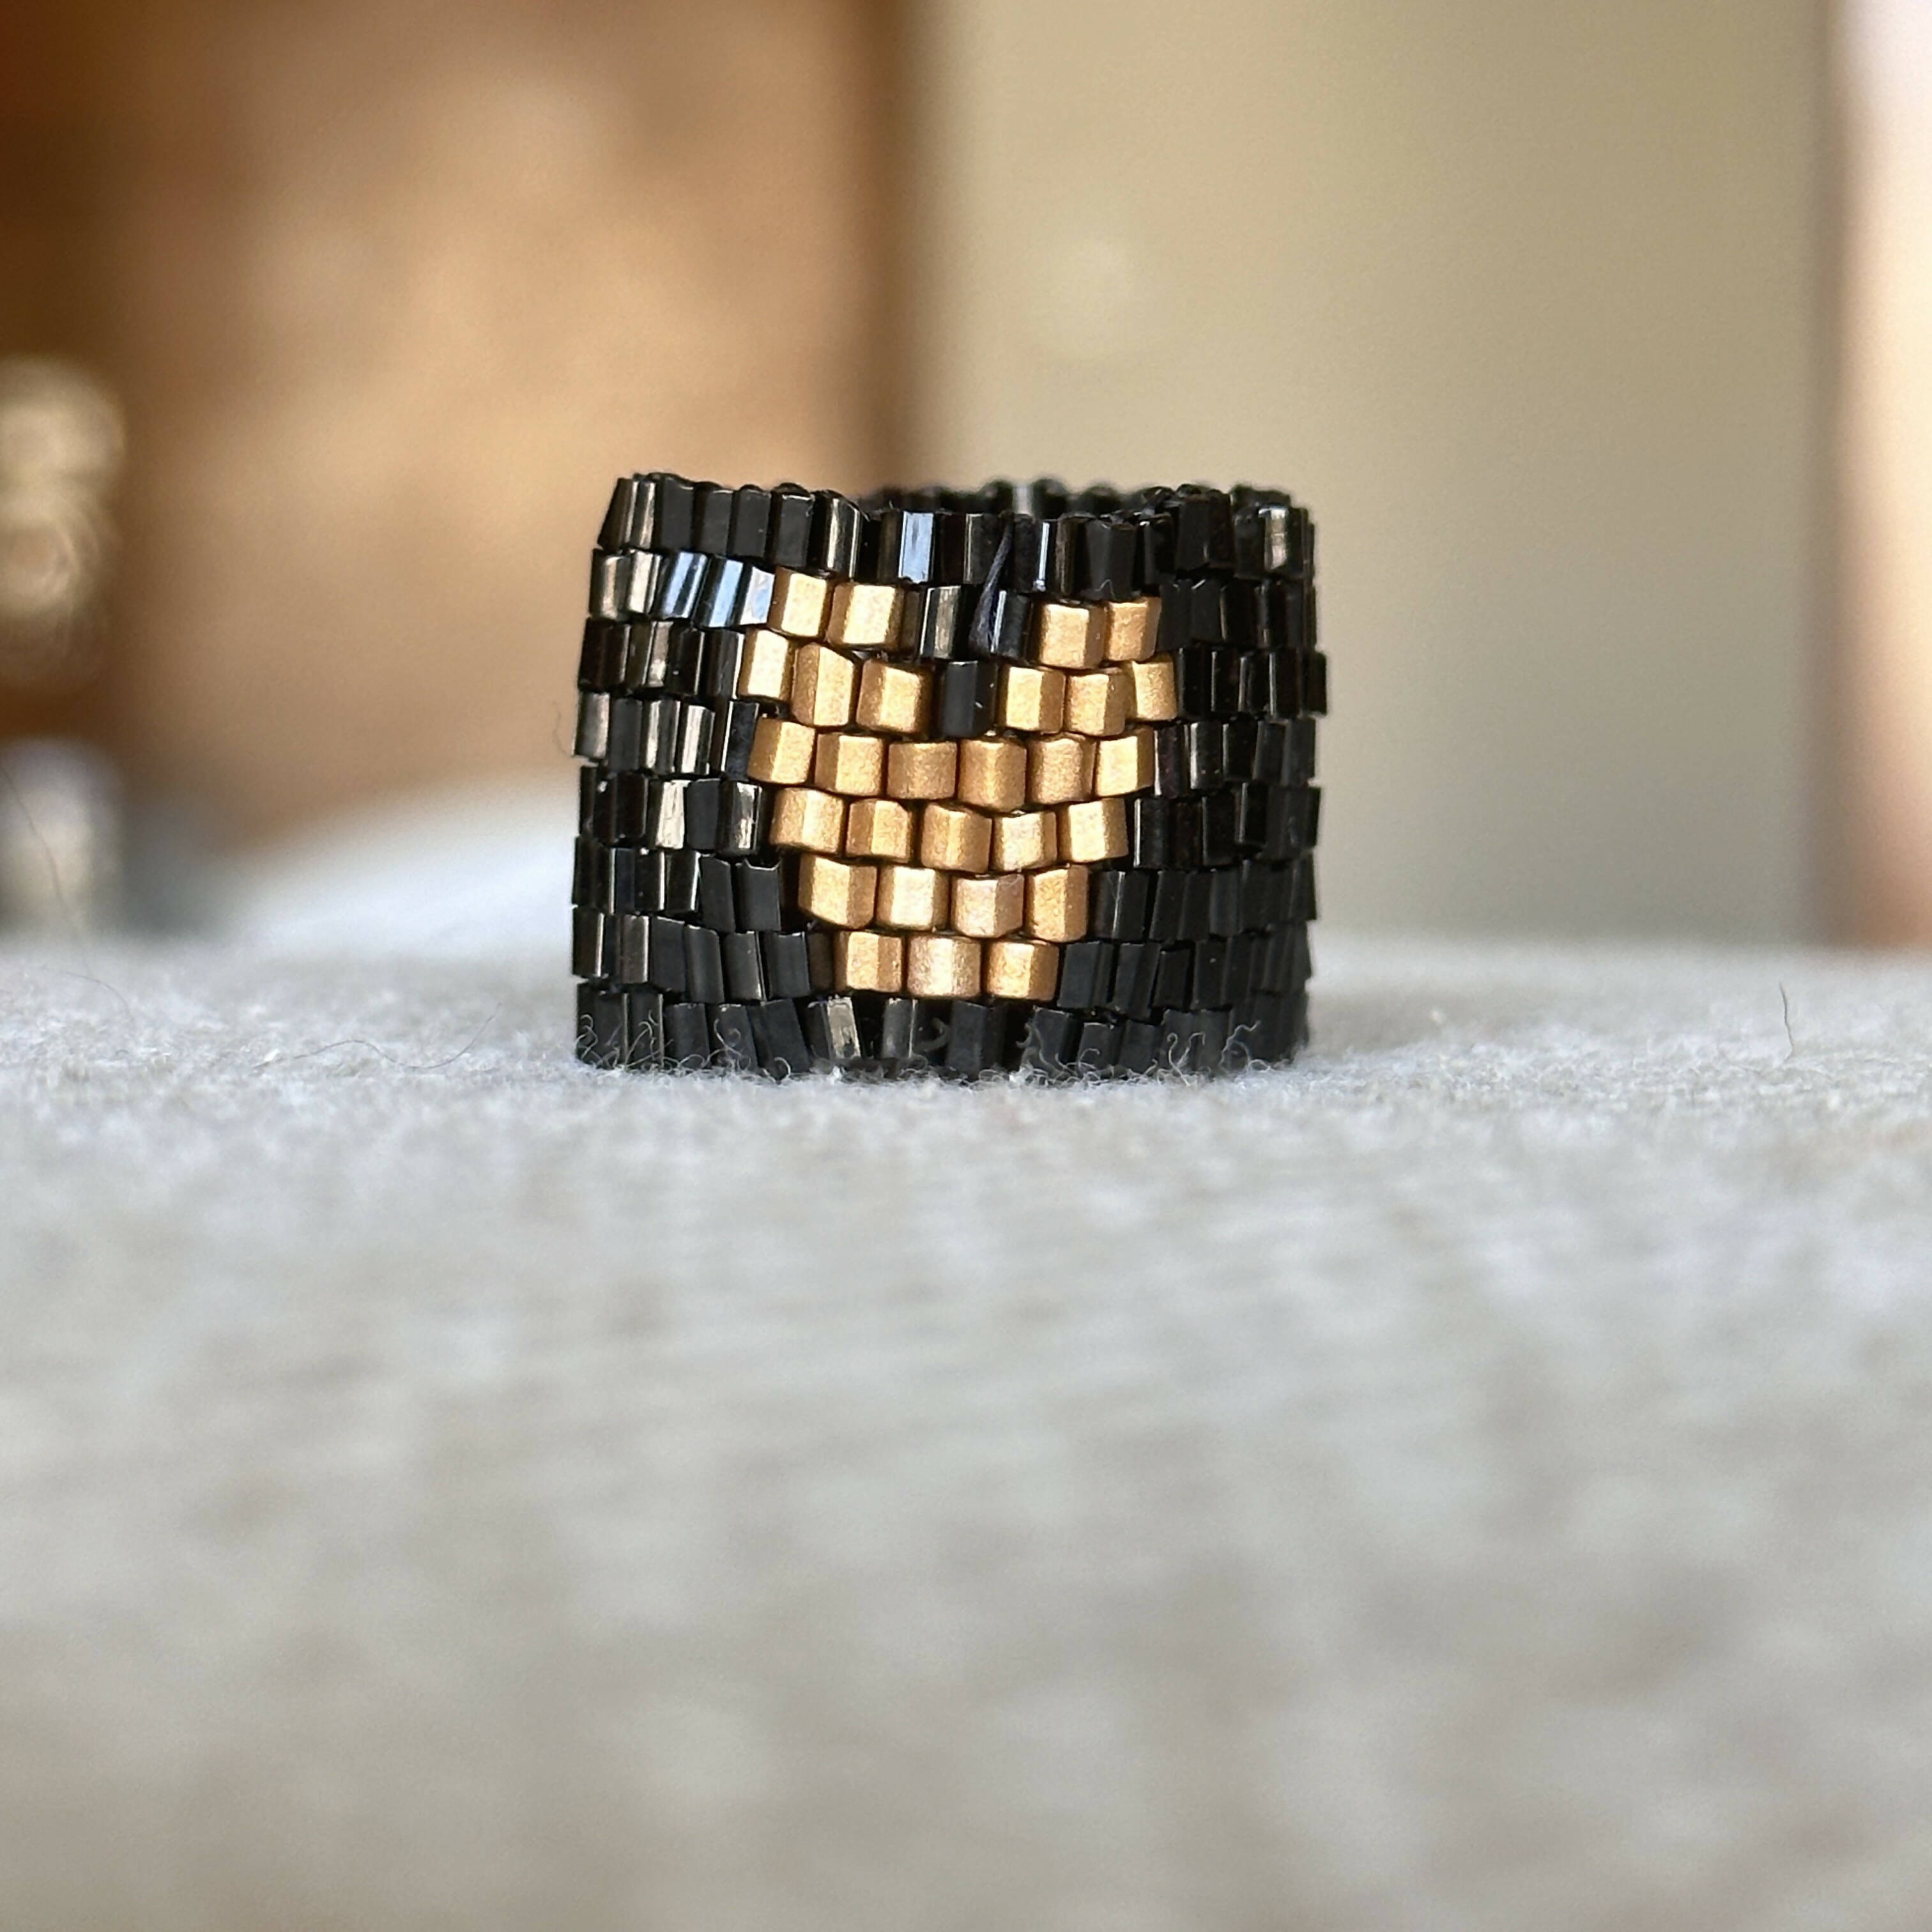 The PUT A RING ON IT collection: Golden heart on black, 8 rows!